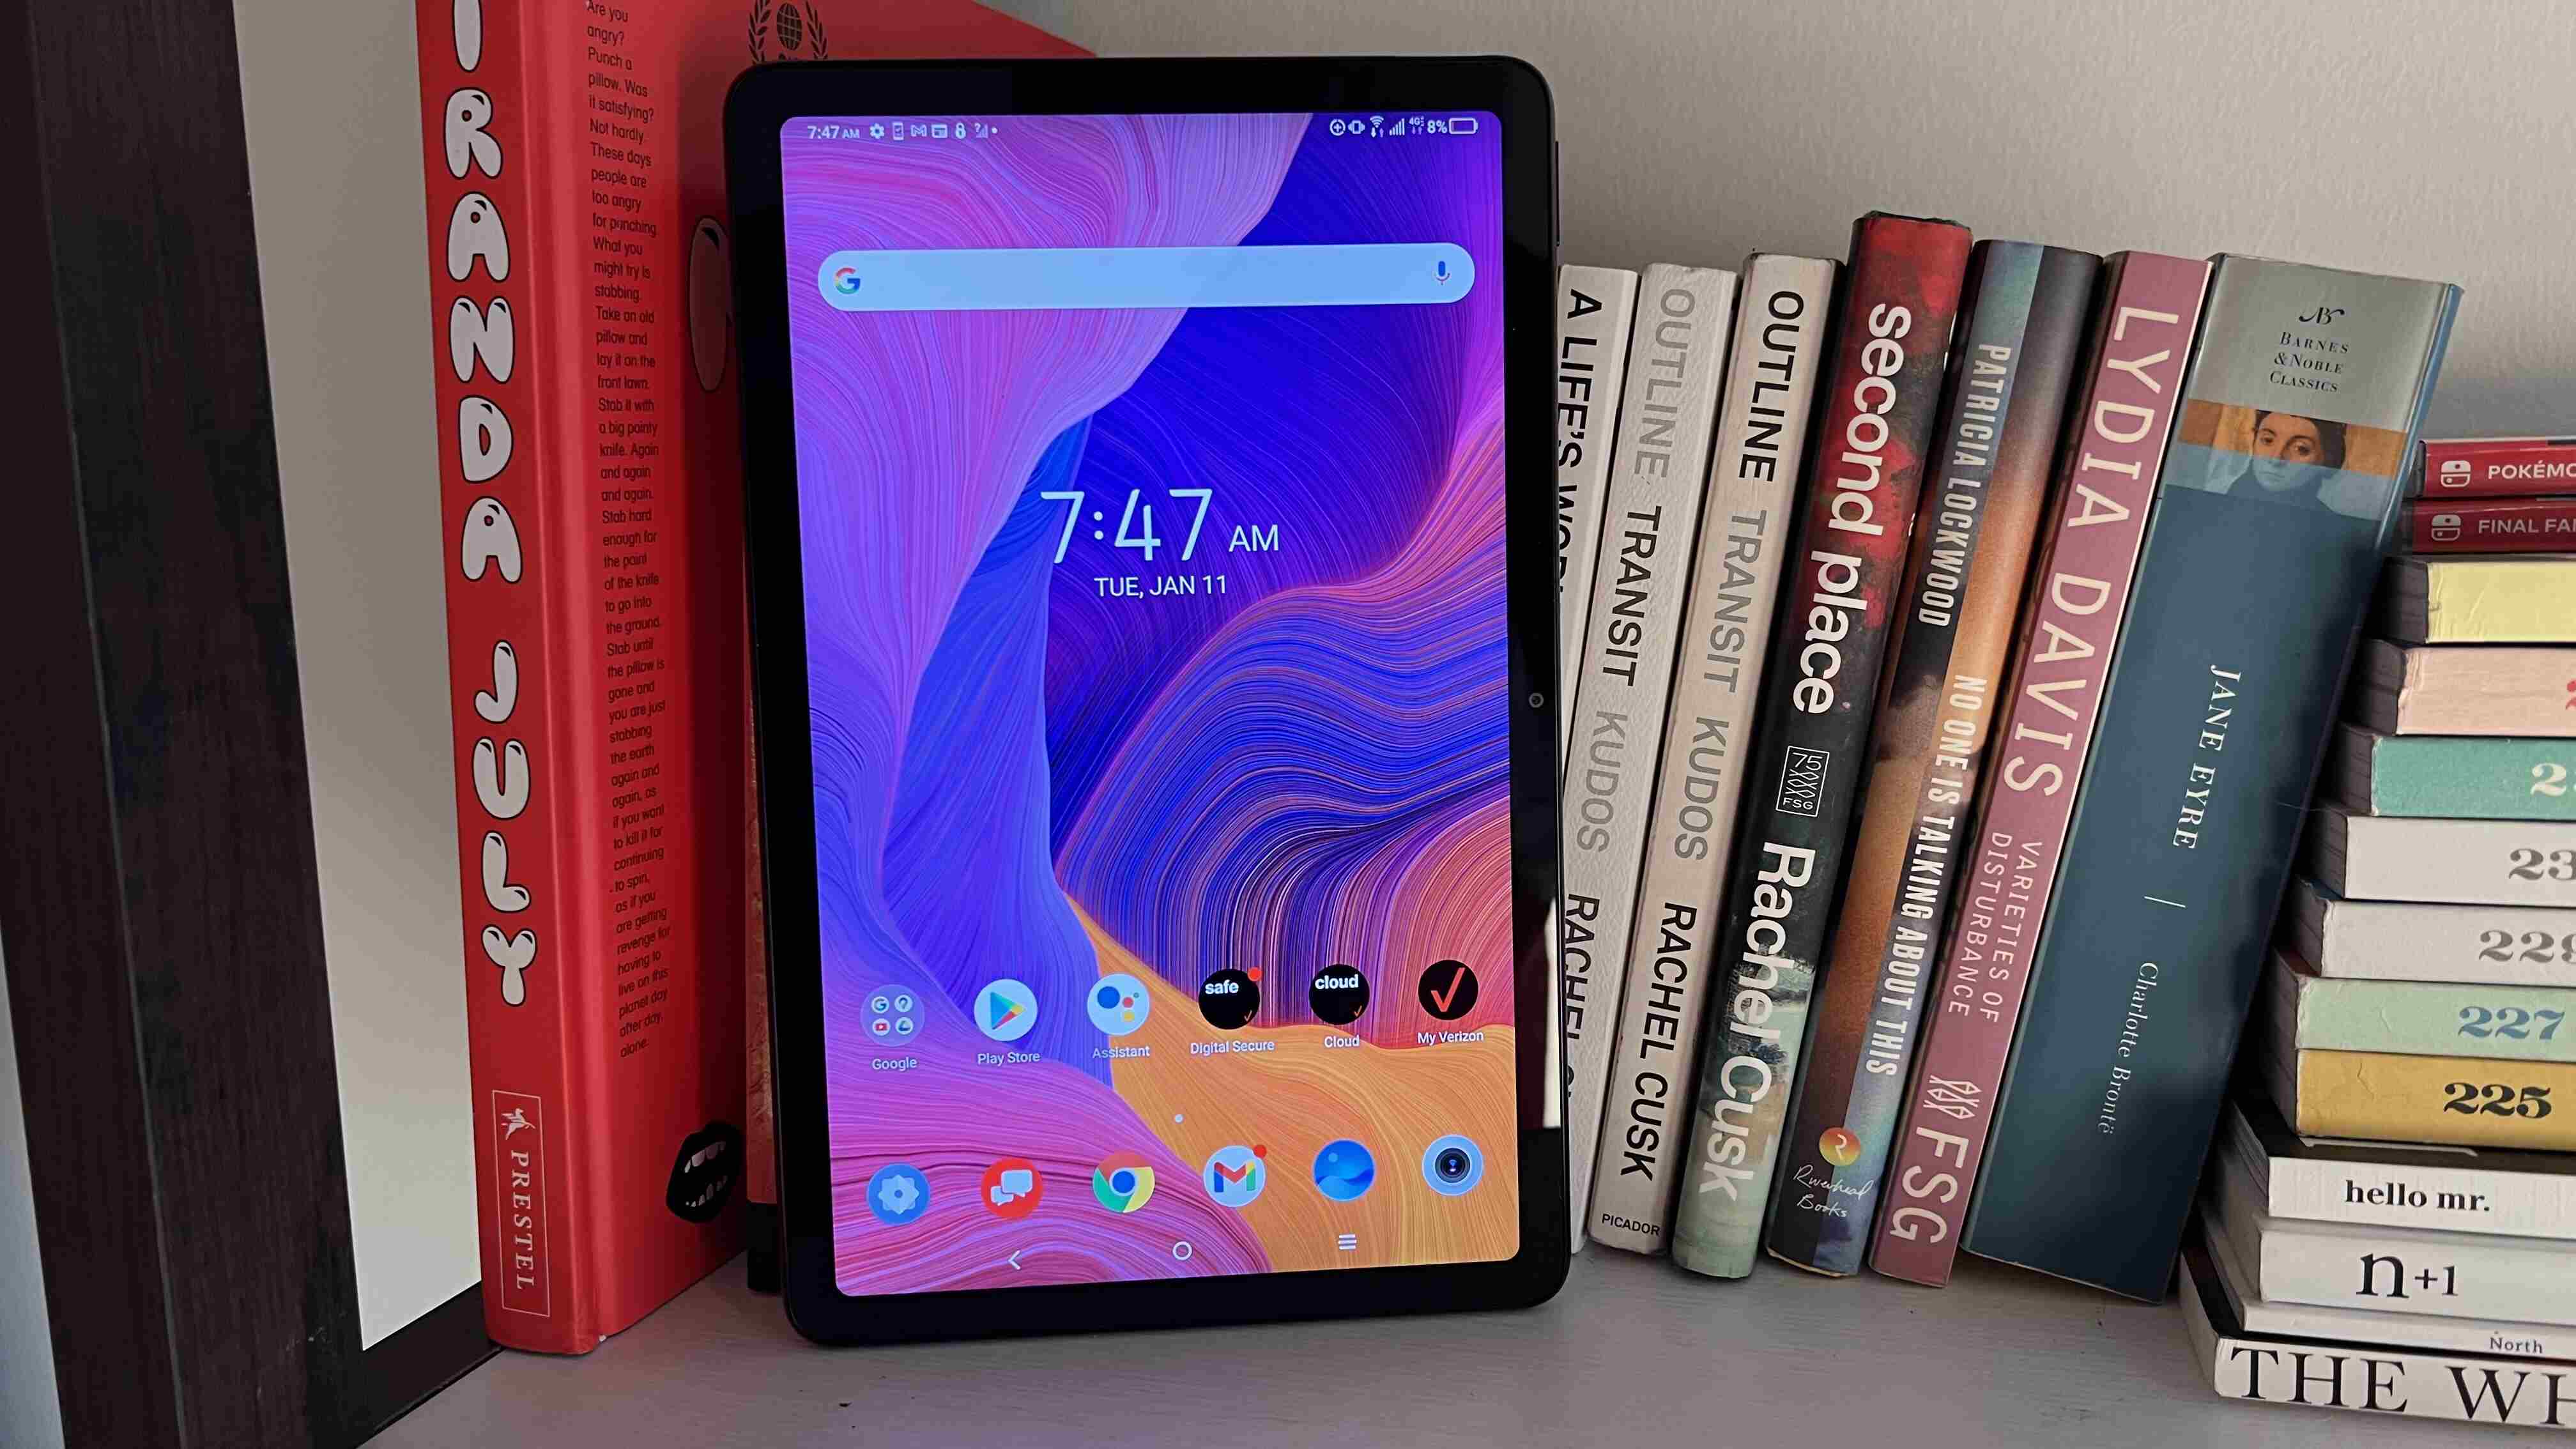 tcls-tab-pro-5g-might-be-worth-the-price-for-cheap-5g